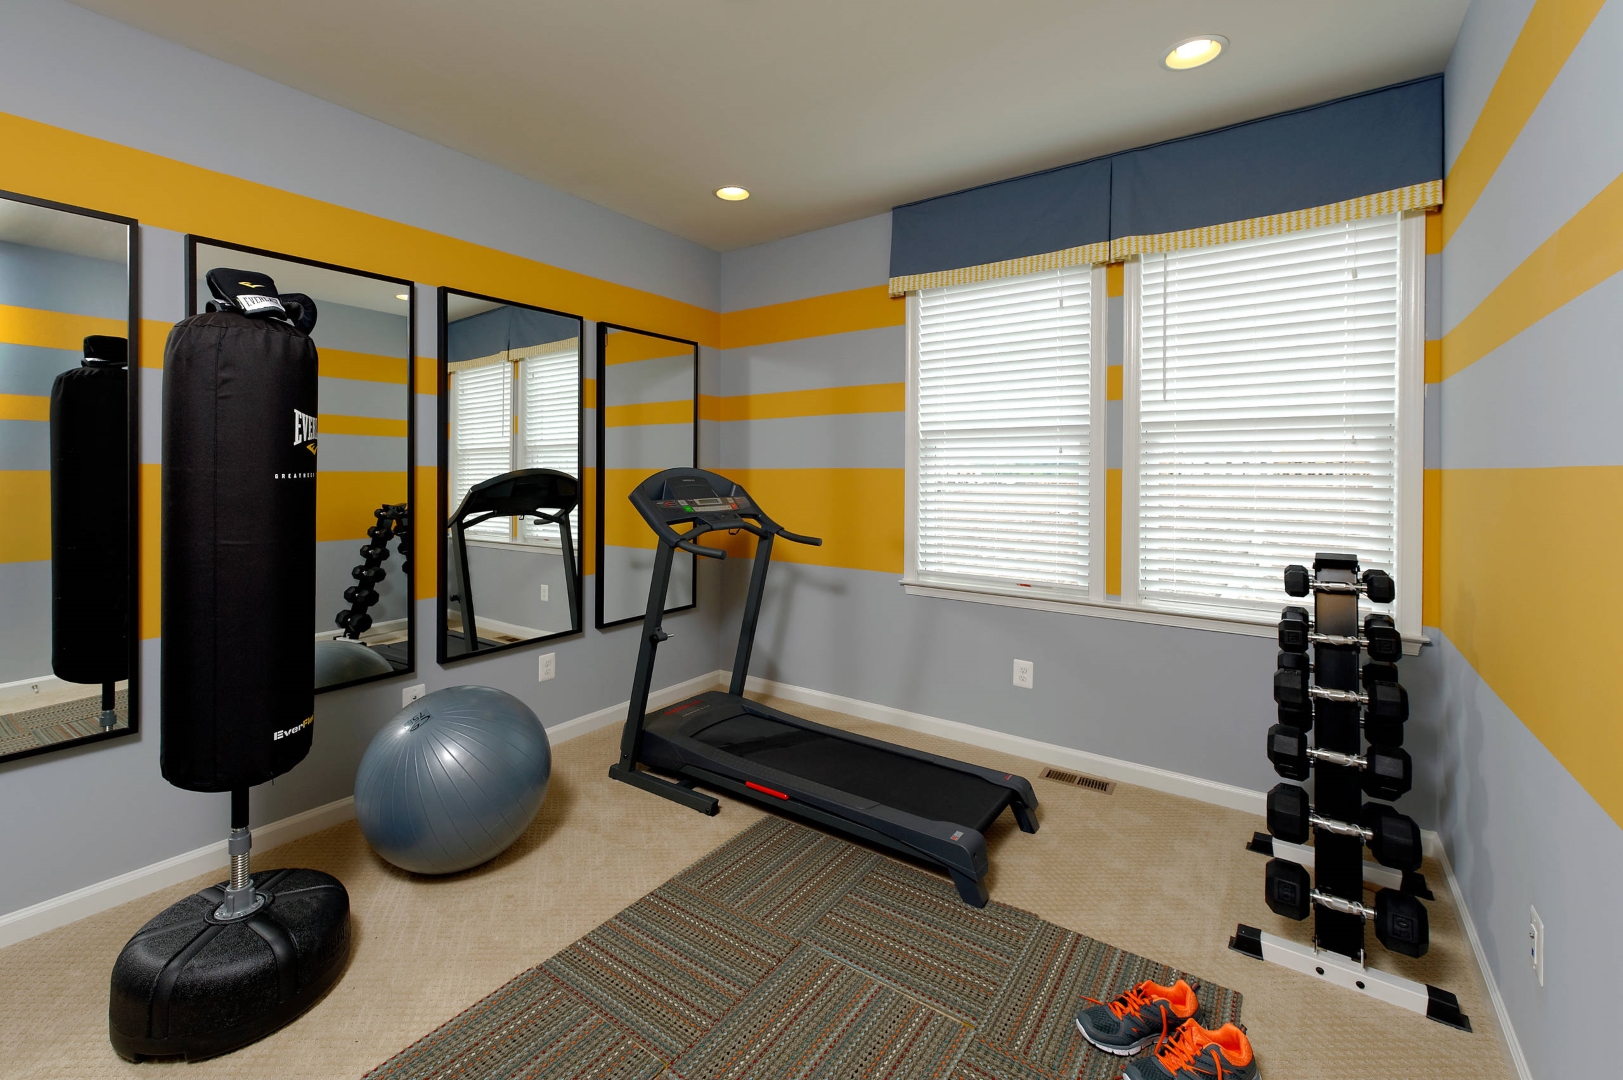 15 Rustic Traditional Home Gym Inspirations for a Fit Retreat